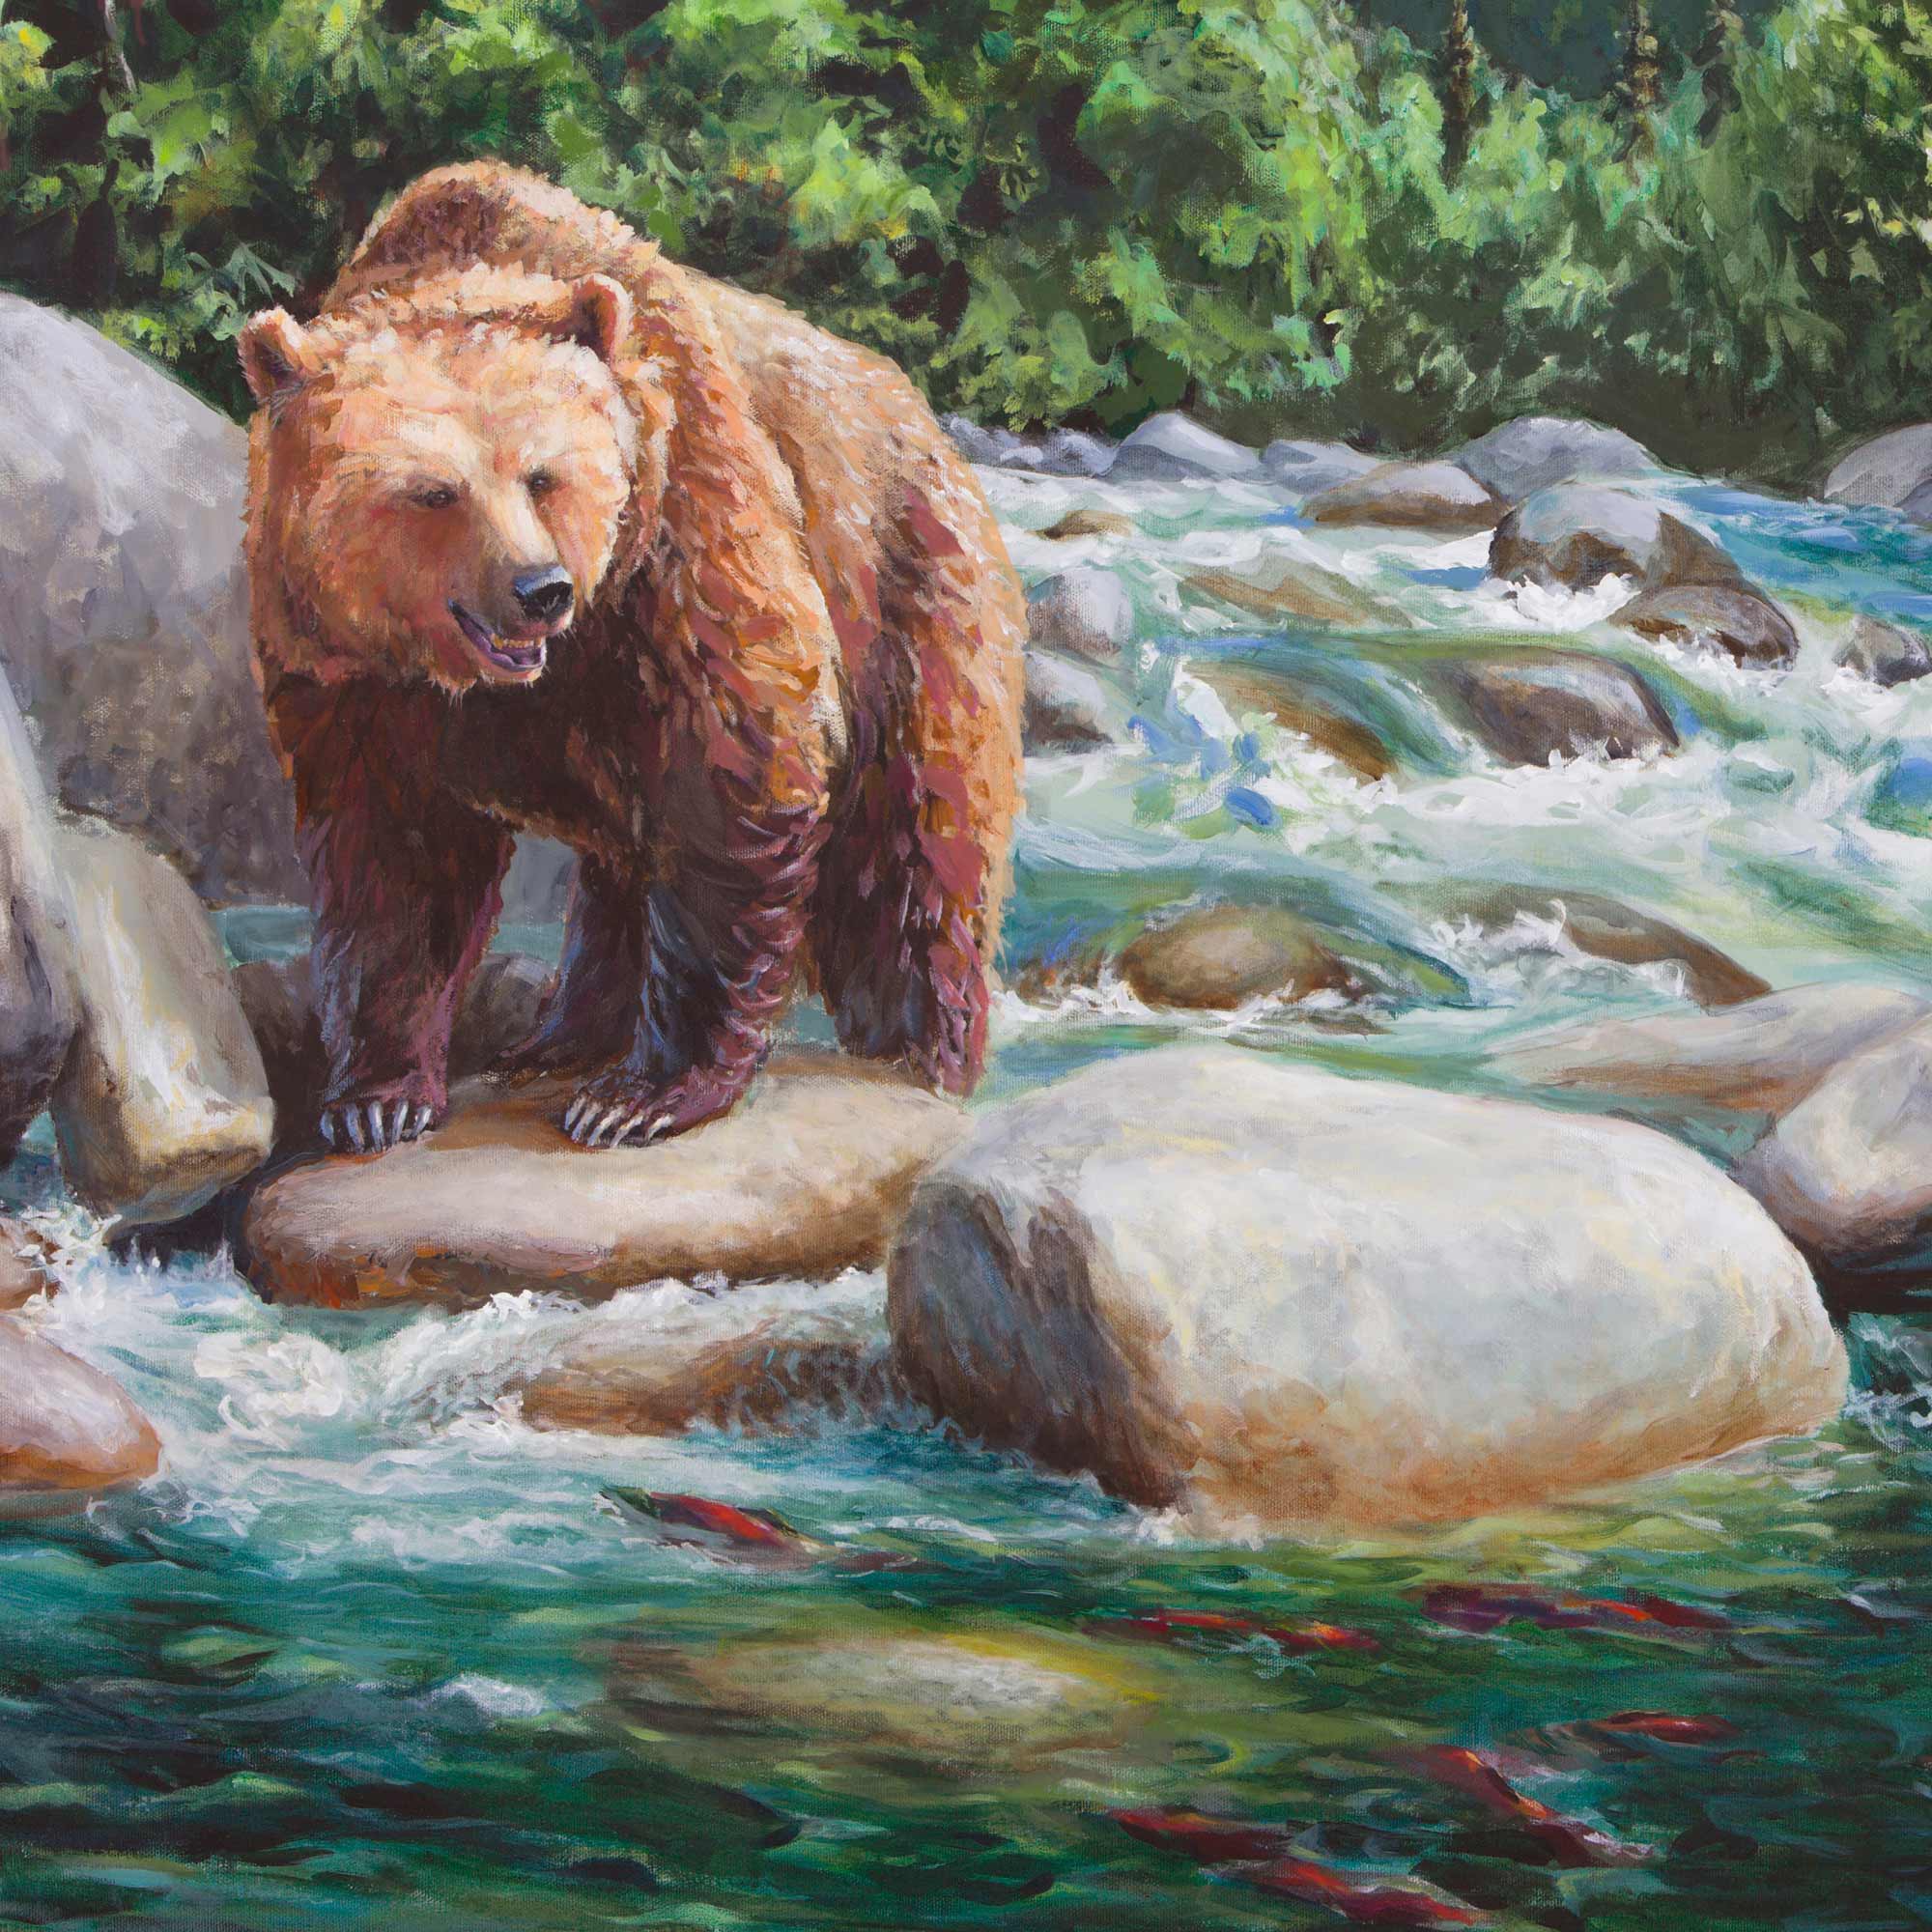 Brown bear painting of grizzly bear wall art print by artist Karen Whitworth